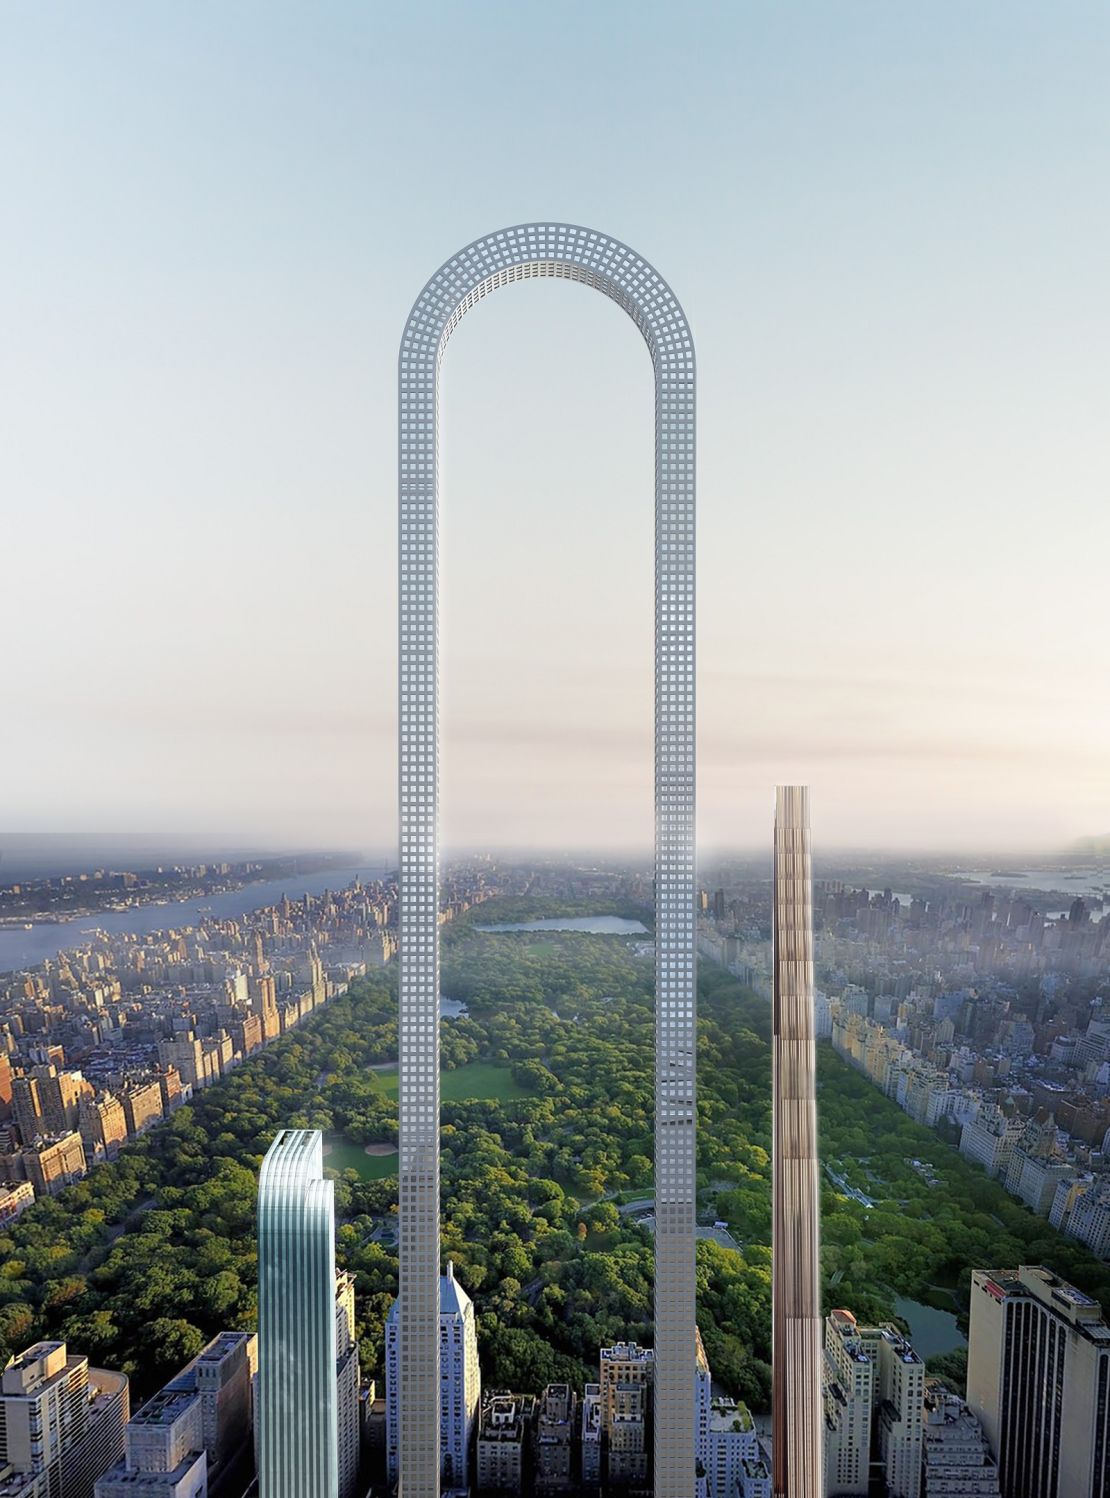 The Big Bend: A U-shaped skyscraper that aims to be the longest in